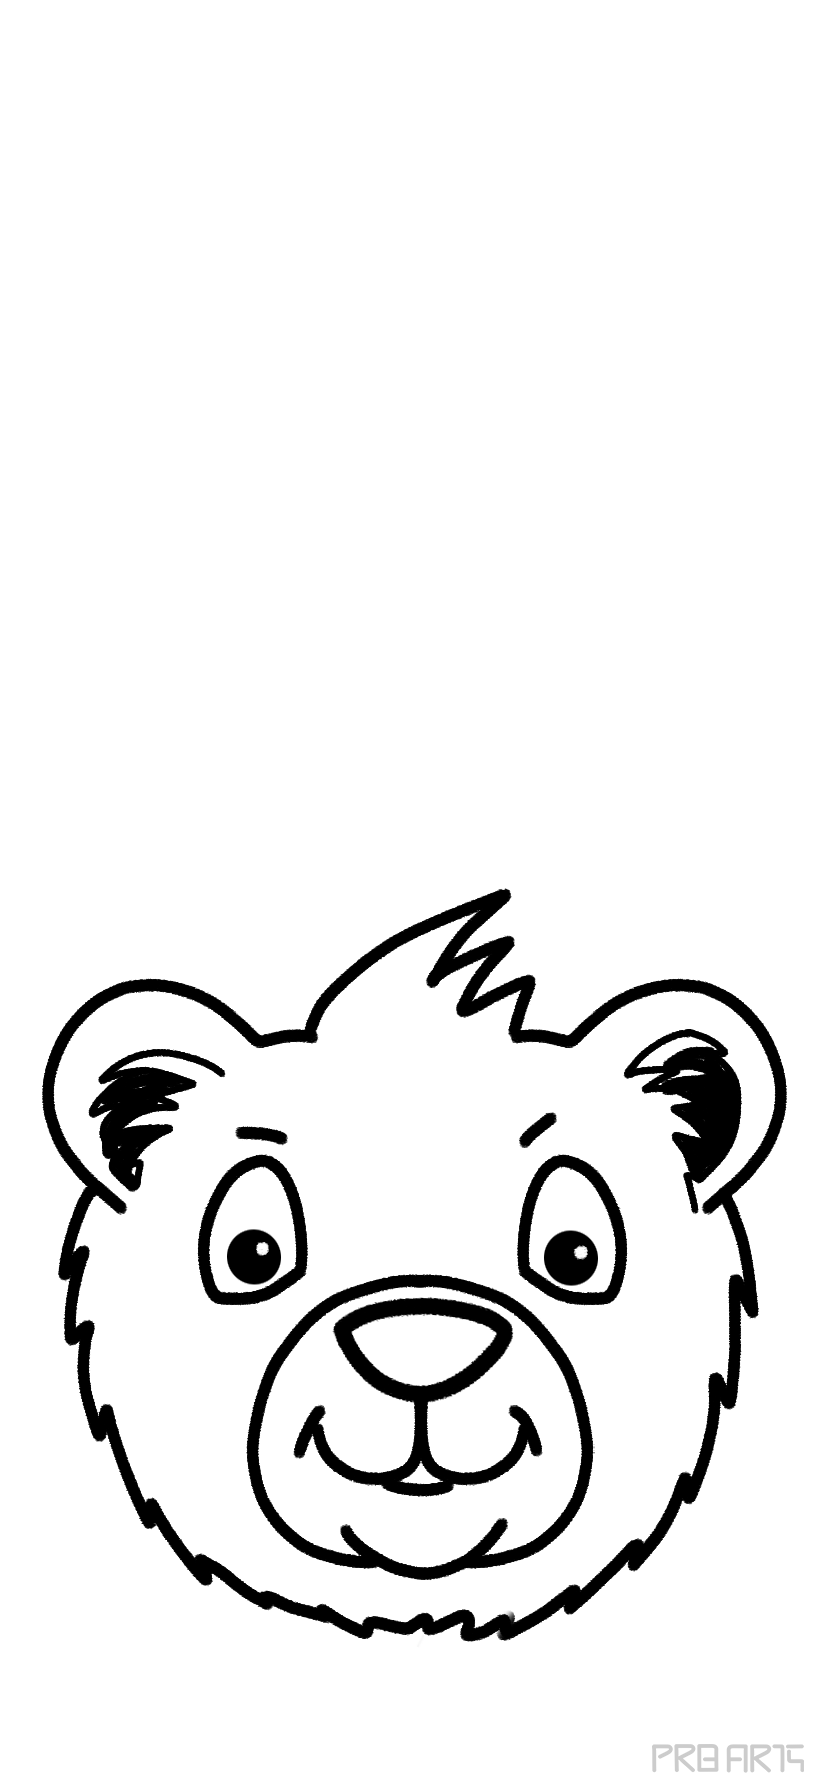 Bear Face Cartoon Style Easy Drawing Tutorial for Kids - PRB ARTS